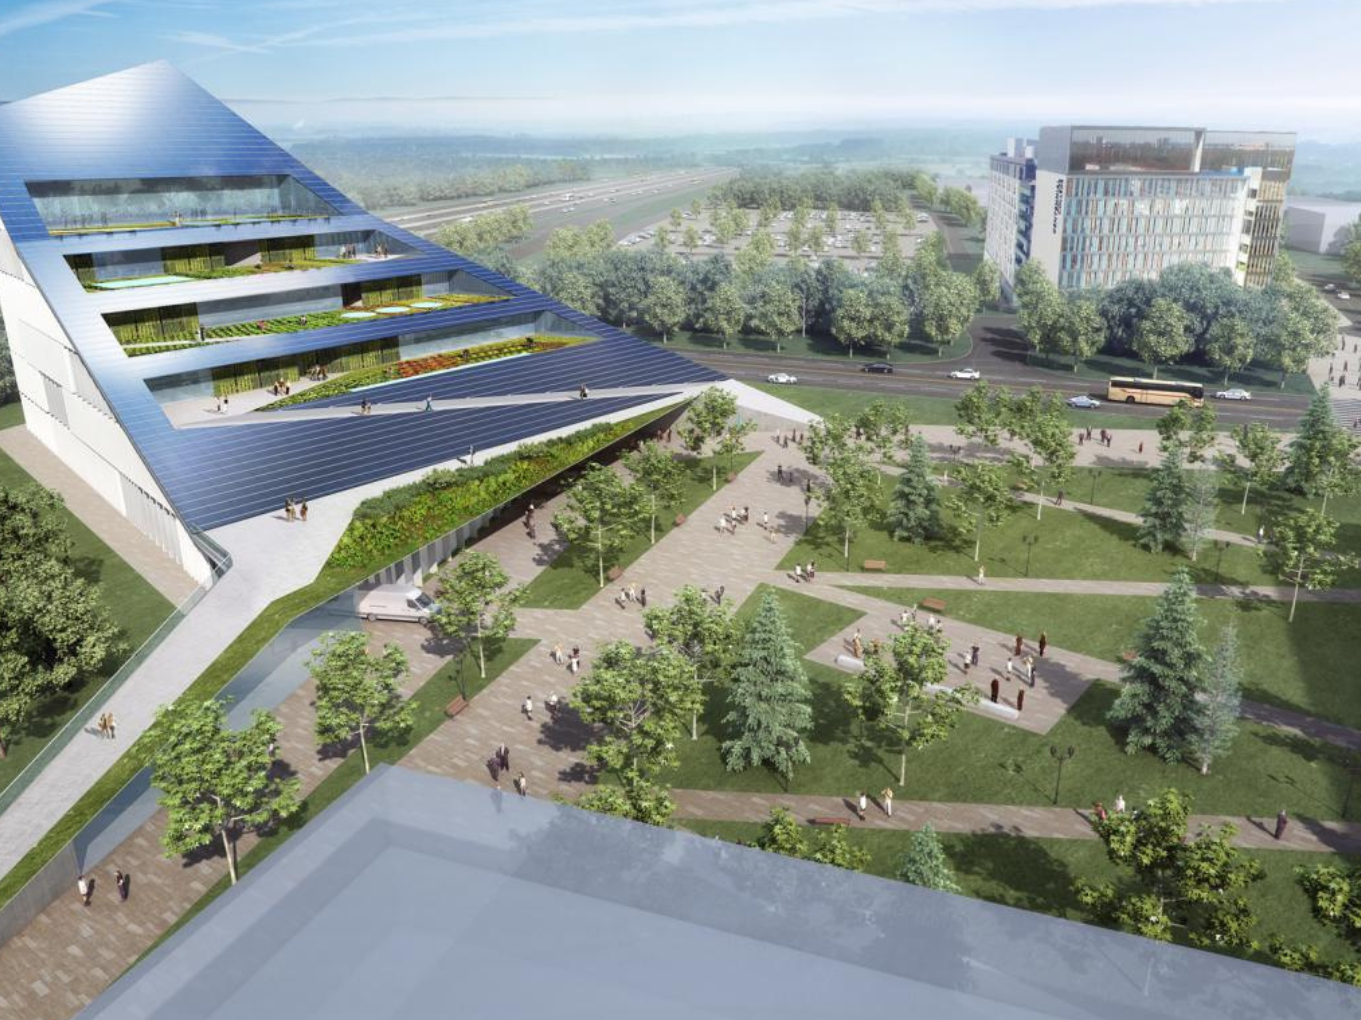 A rendering of future campus buildings at the University of Toronto Scarborough